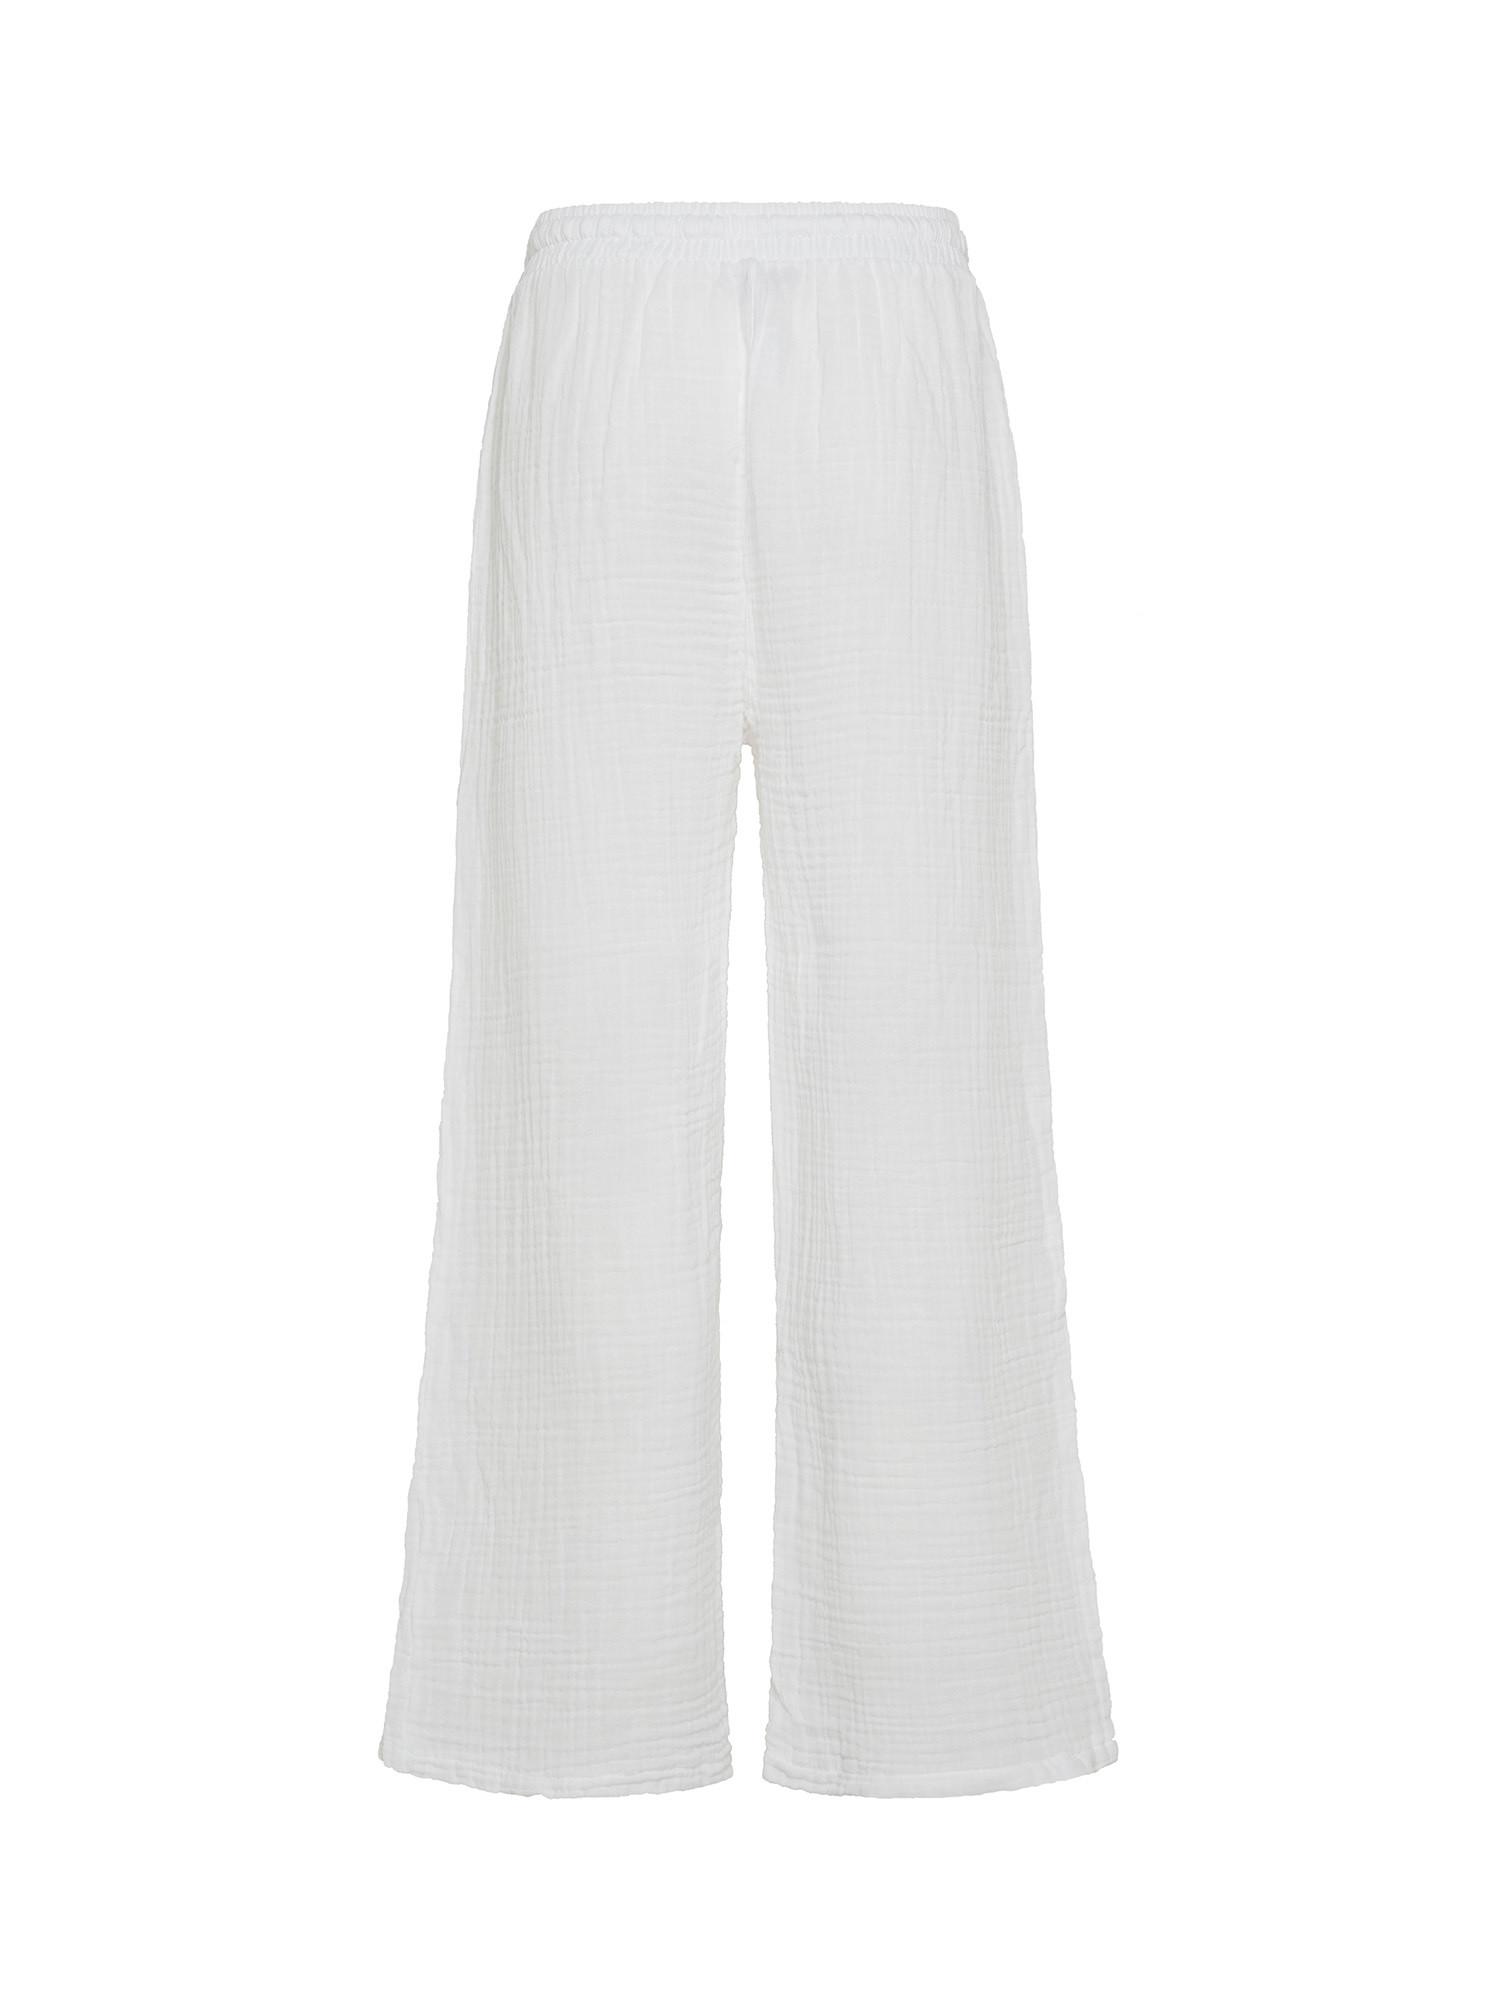 Long muslin trousers with palazzo cut, White, large image number 1